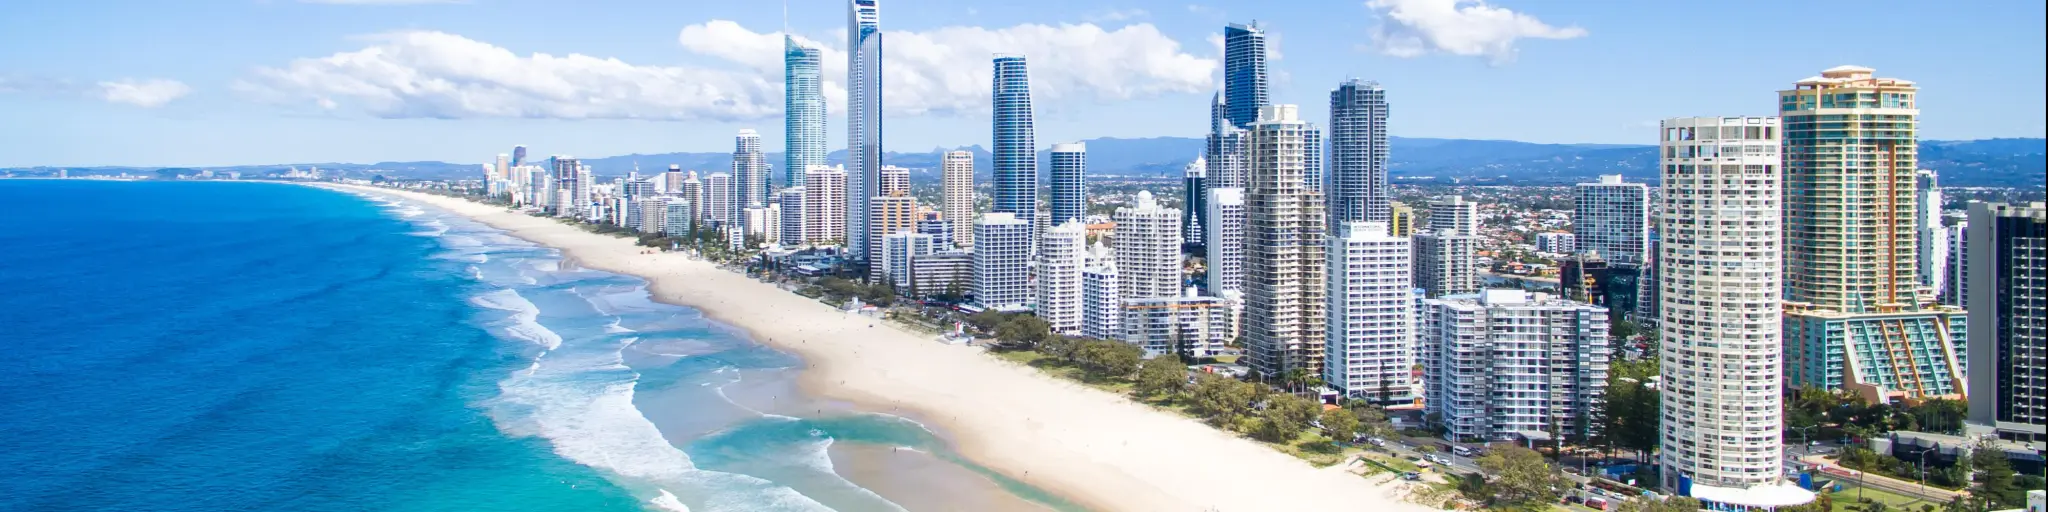 Gold Coast, Australia showing an aerial view of the tall city buildings with the coast and golden sand in the foreground.